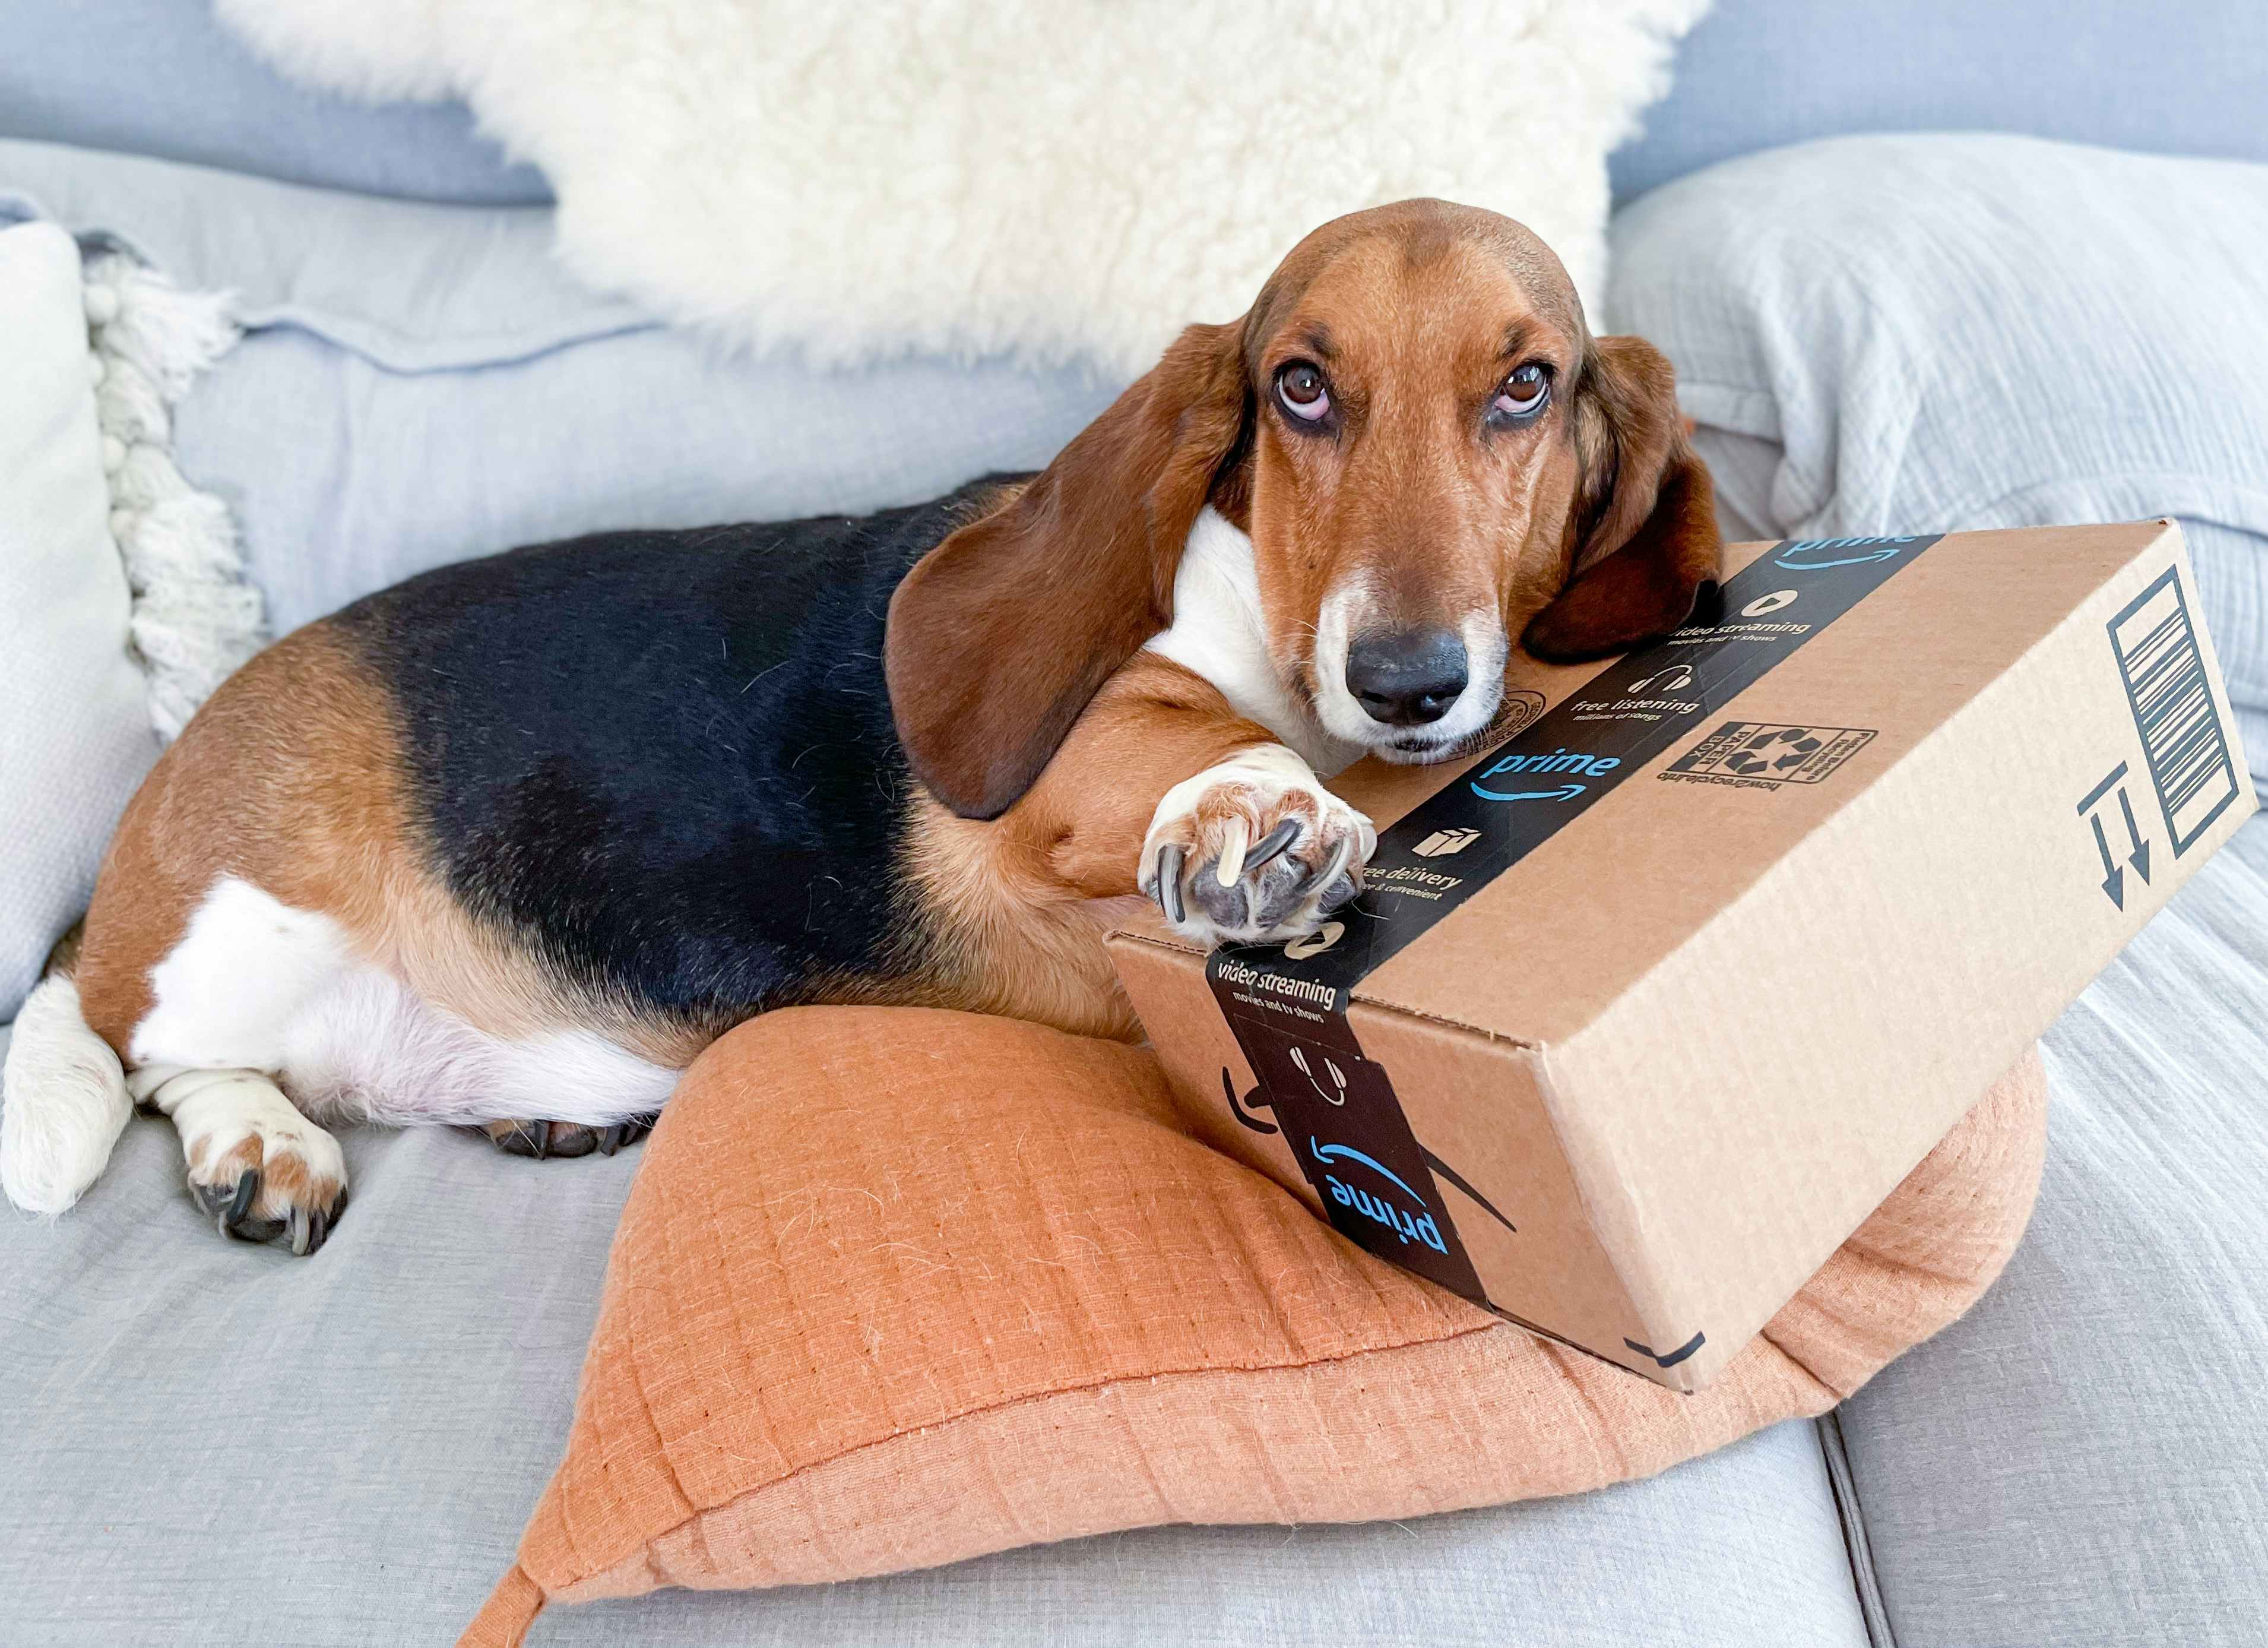 A dog laying on a couch, resting its head and paw on an Amazon delivery box.